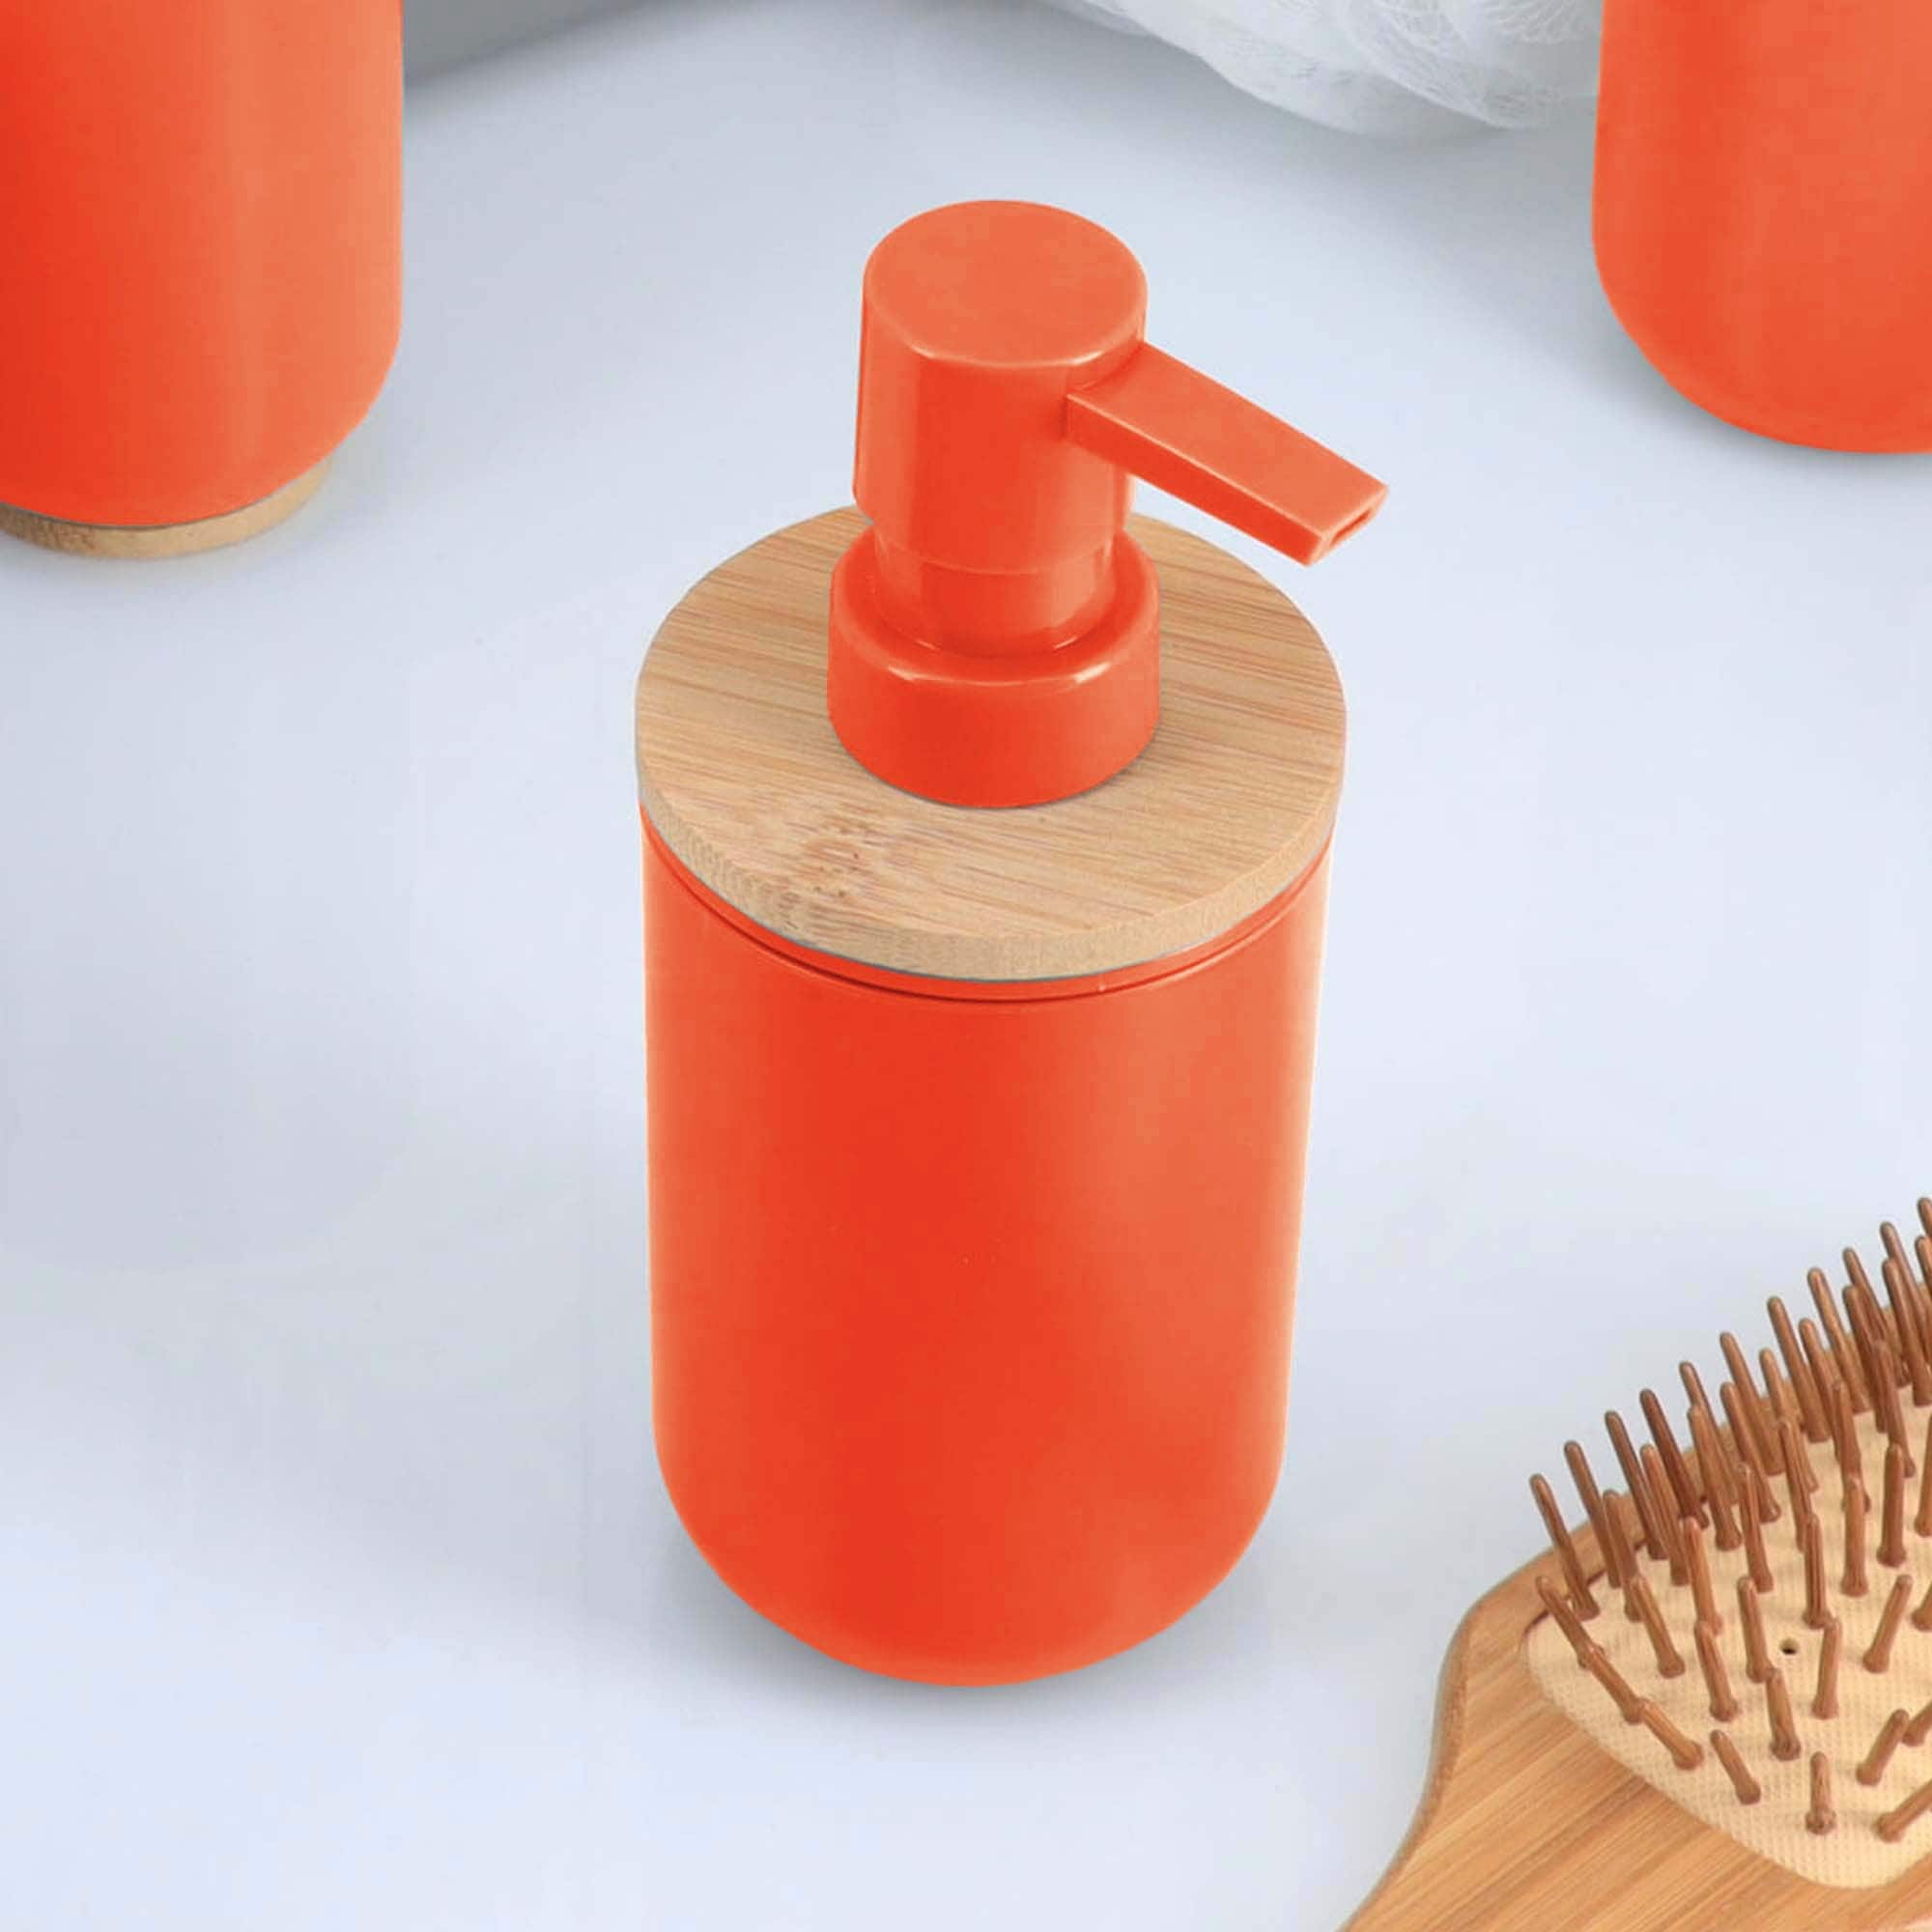 Evideco Orange Cotton Pad and Q-Tip Holder Padang with Bamboo Top - Organize in Style, Bathroom Vanity Organizer